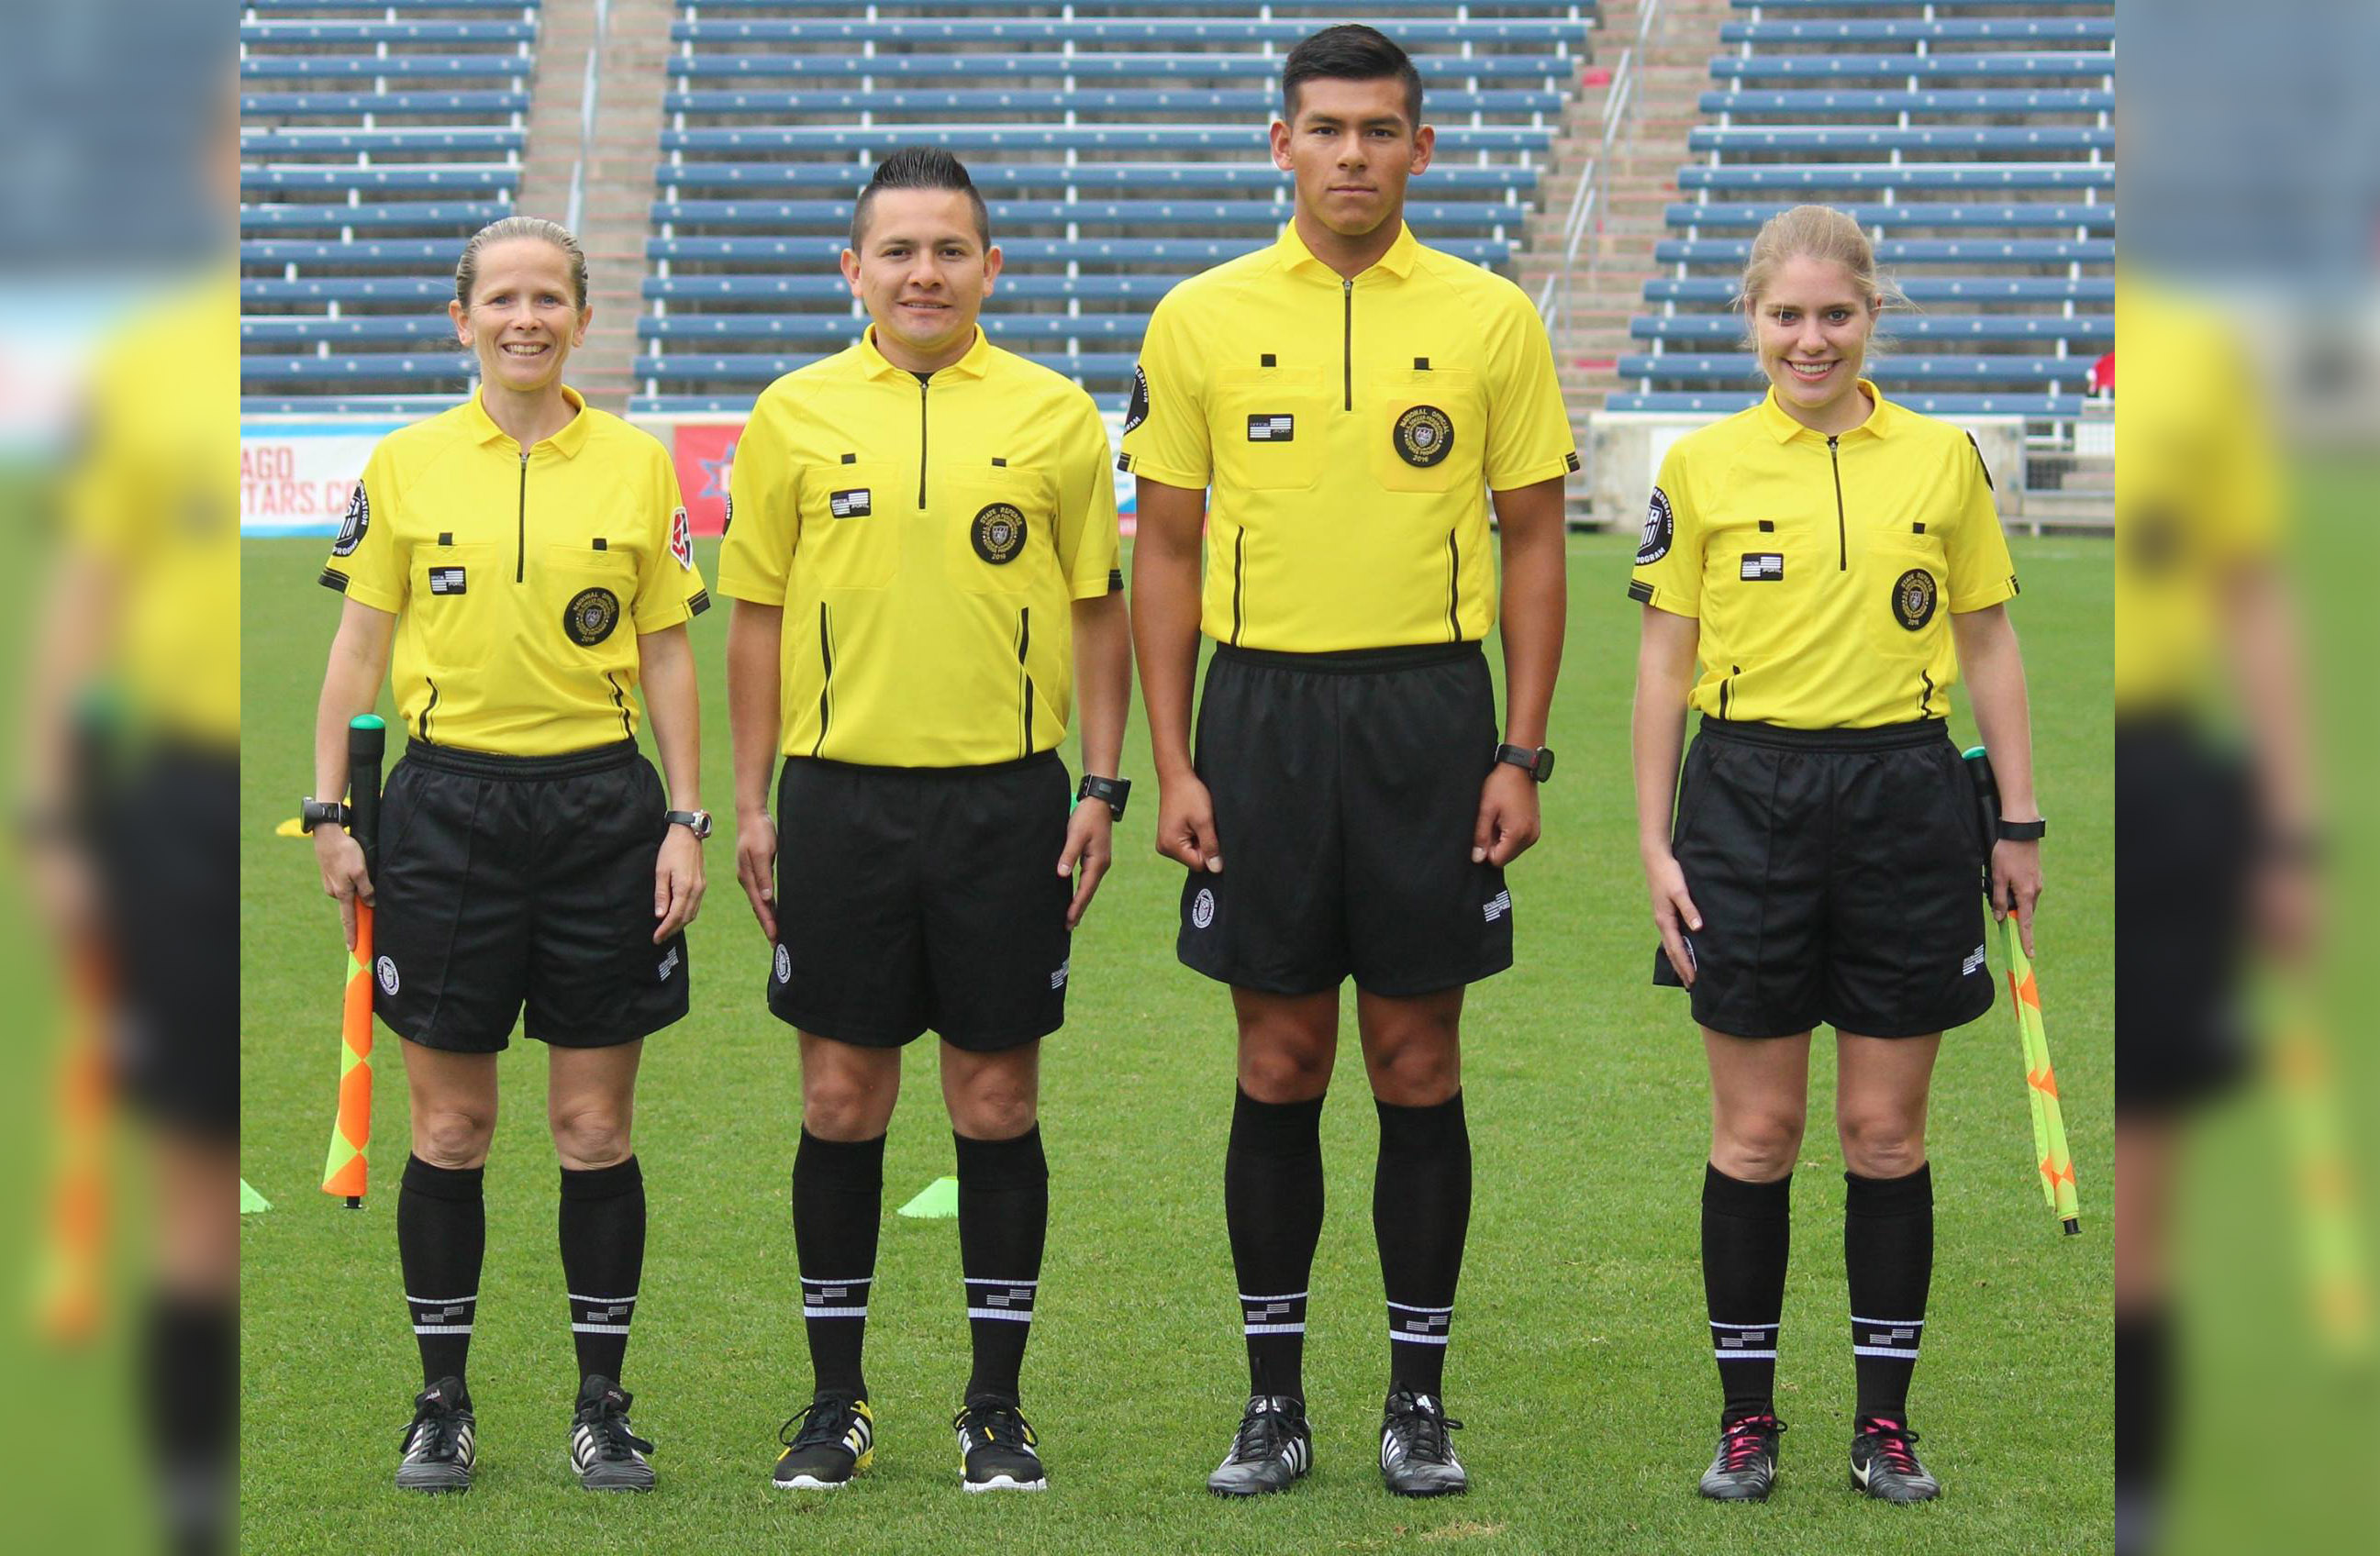 official referee shirts